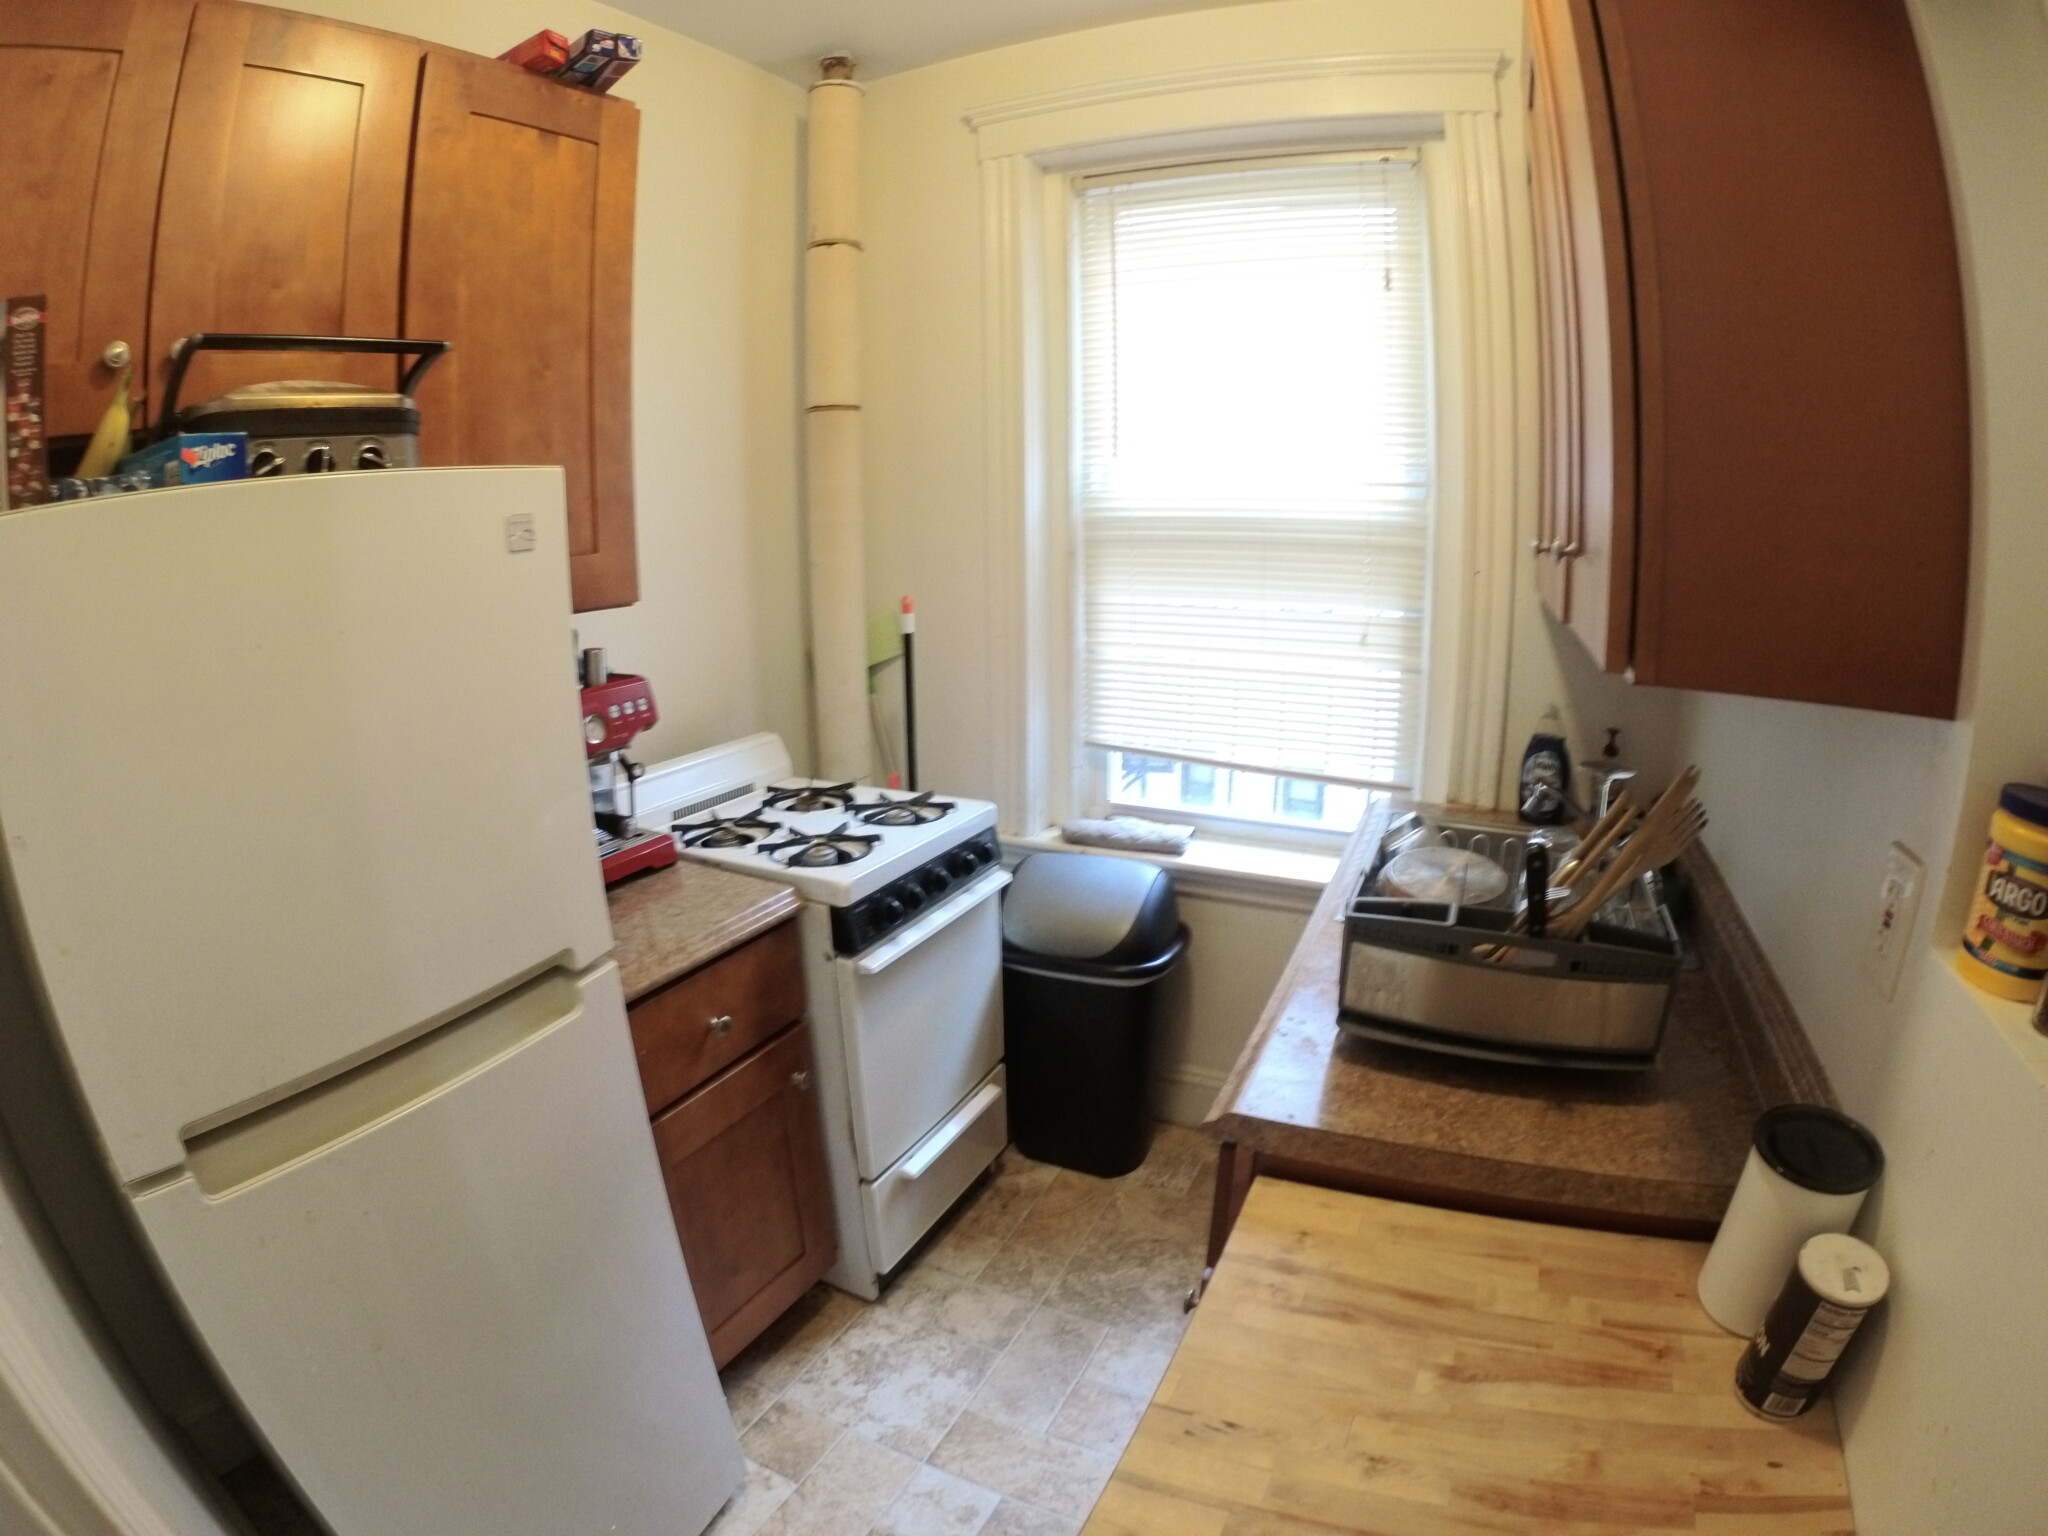 Photos of apartment on Western Ave.,Boston MA 02135